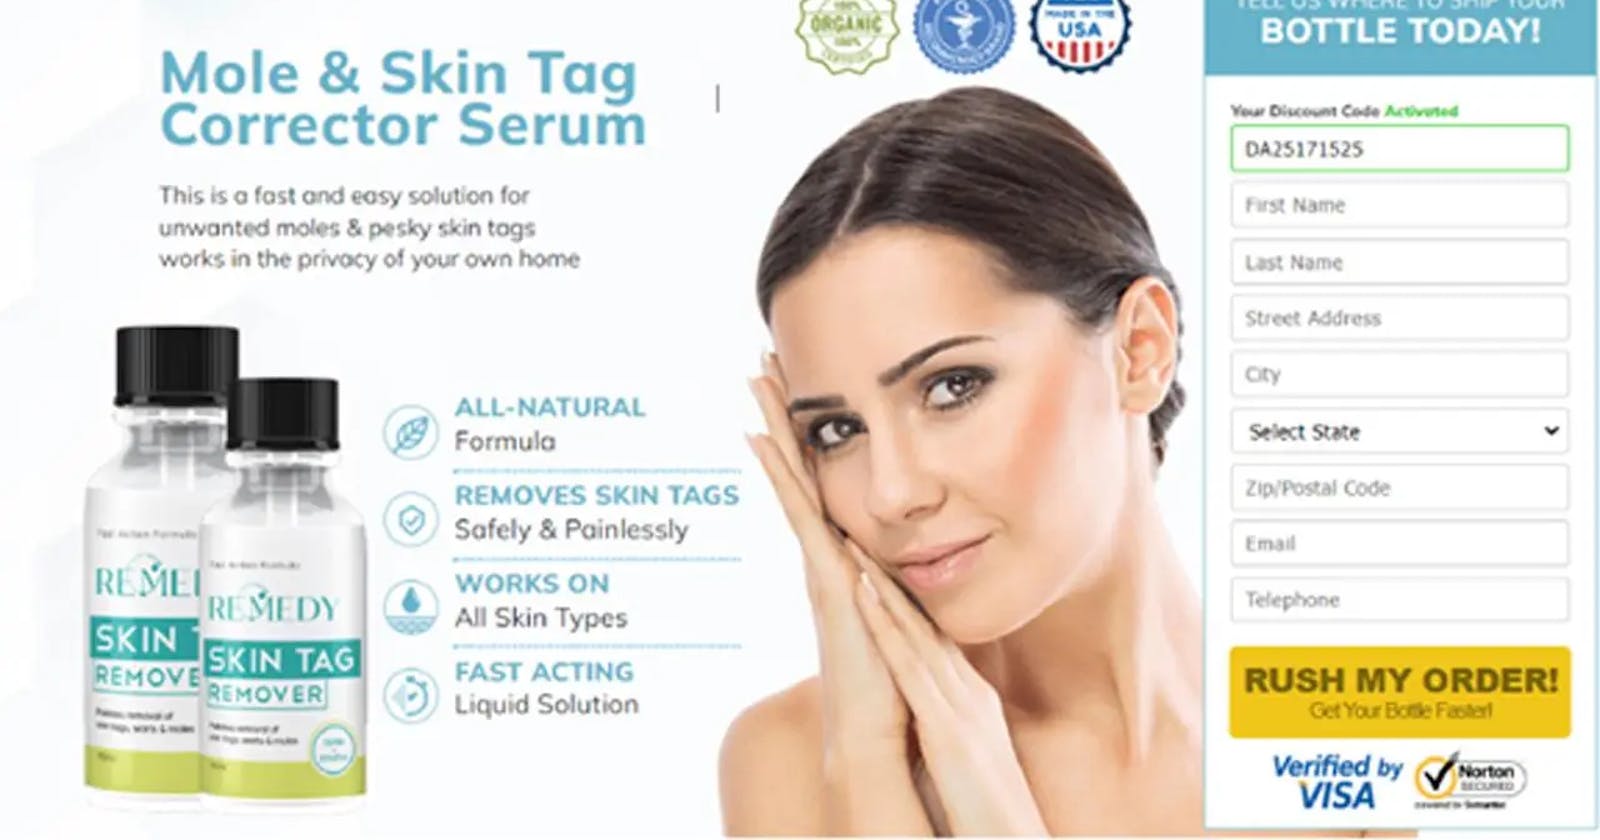 Remedy Skin Tag Remover Reviews - Alarming Customer Complaints! Cheap Scam Product?